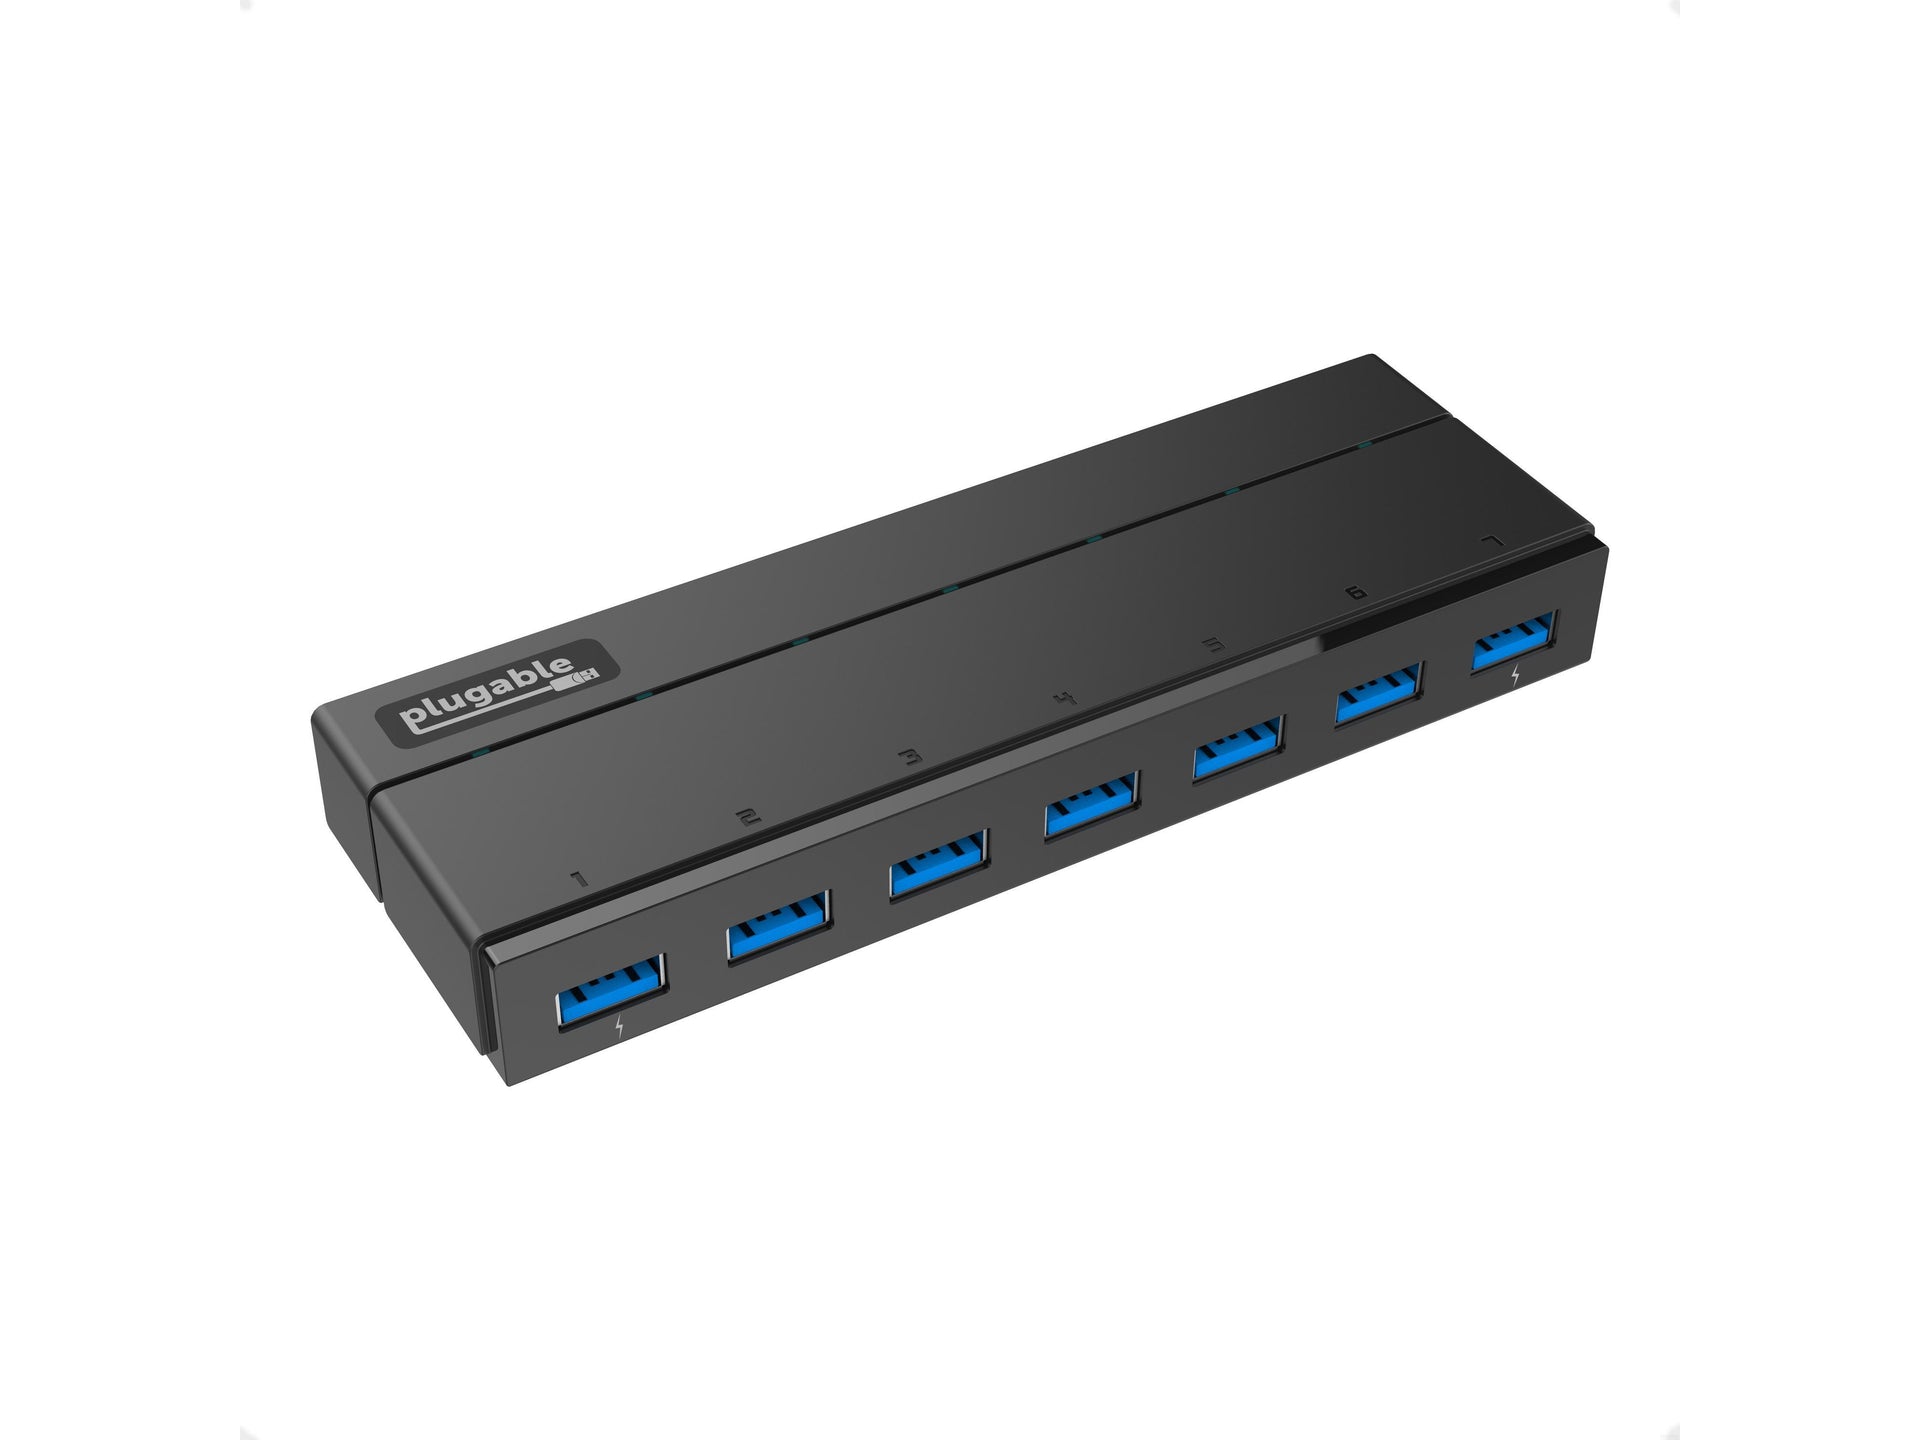 Powered 7-Port USB 3.0 Hub, ORICO USB Data Hub with 12V Power Adapter,  Multi USB 3.0 Splitter with 3.3 Ft Long USB Cable for PC, Laptop, Keyboard